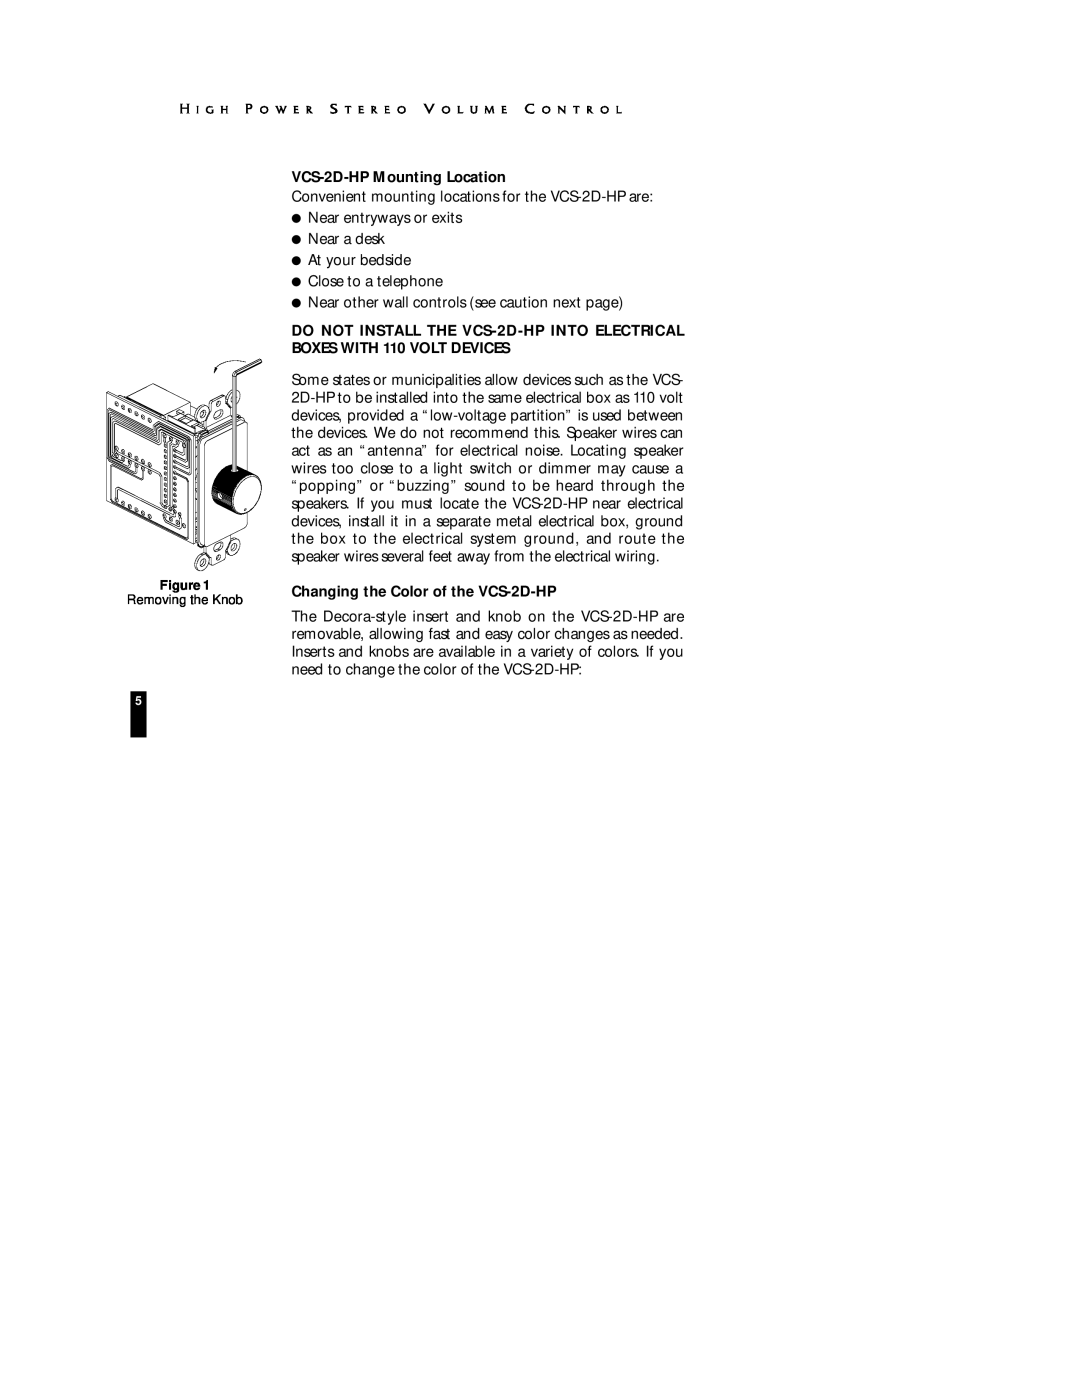 Niles Audio manual VCS-2D-HP Mounting Location, Changing the Color of the VCS-2D-HP 